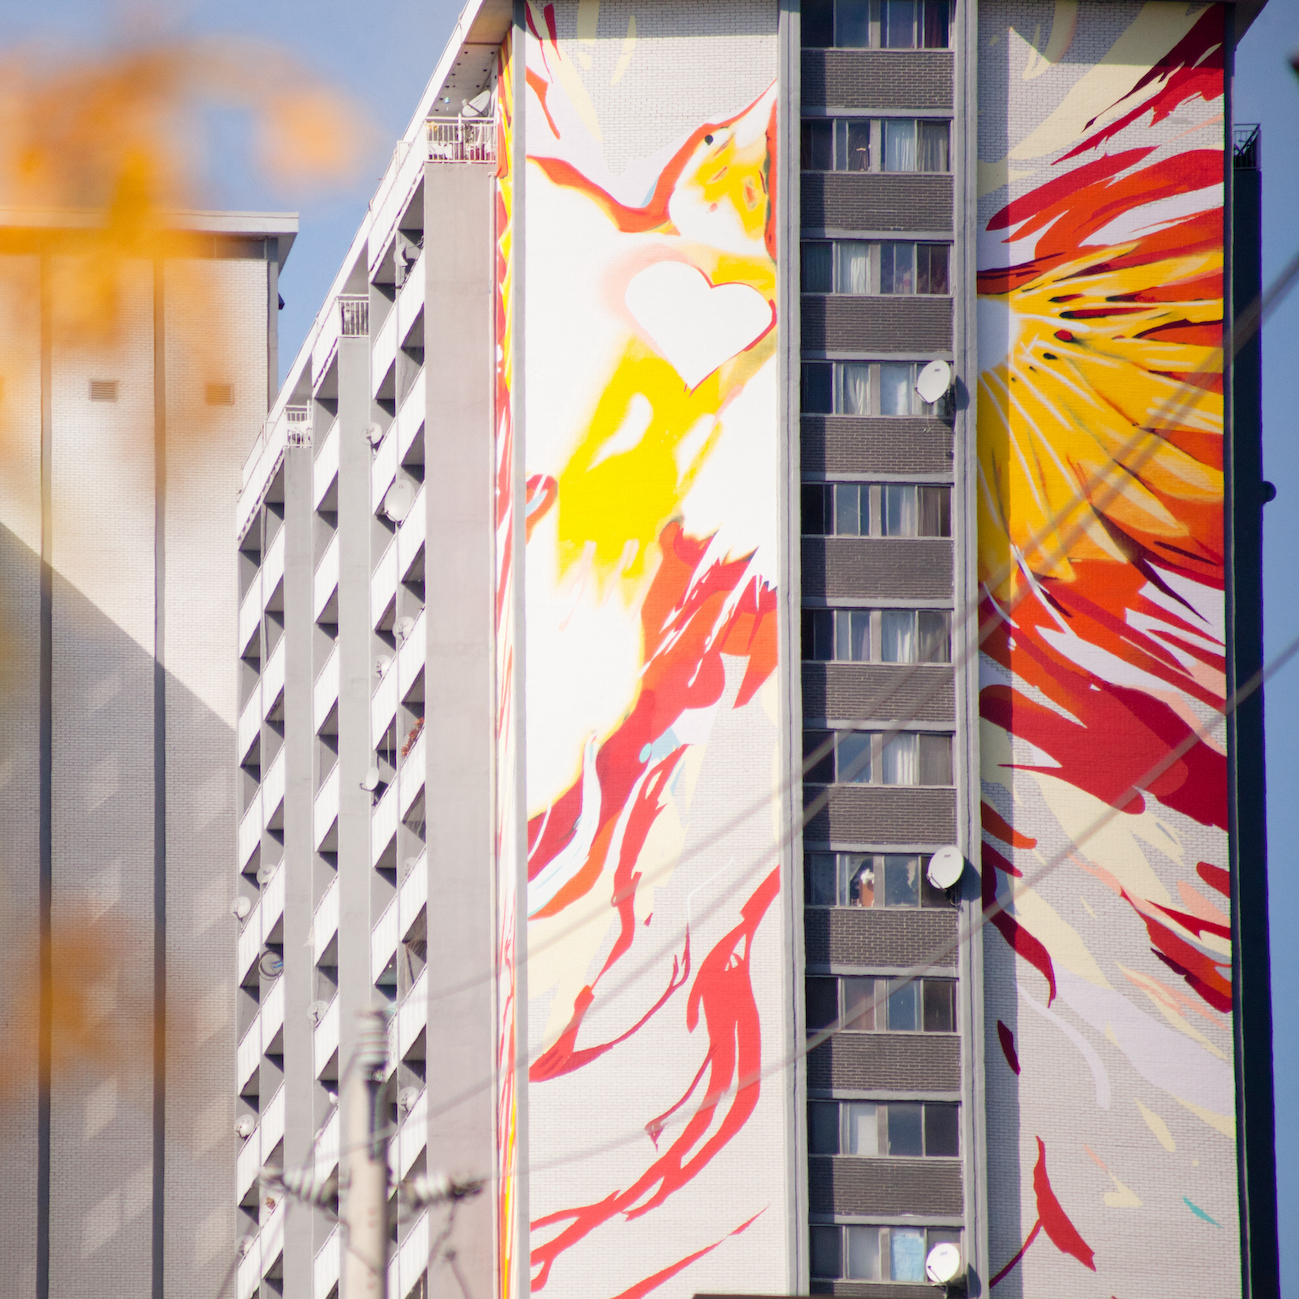 A close up photo shows the 200 Wellesley St. Mural by Sean Martindale